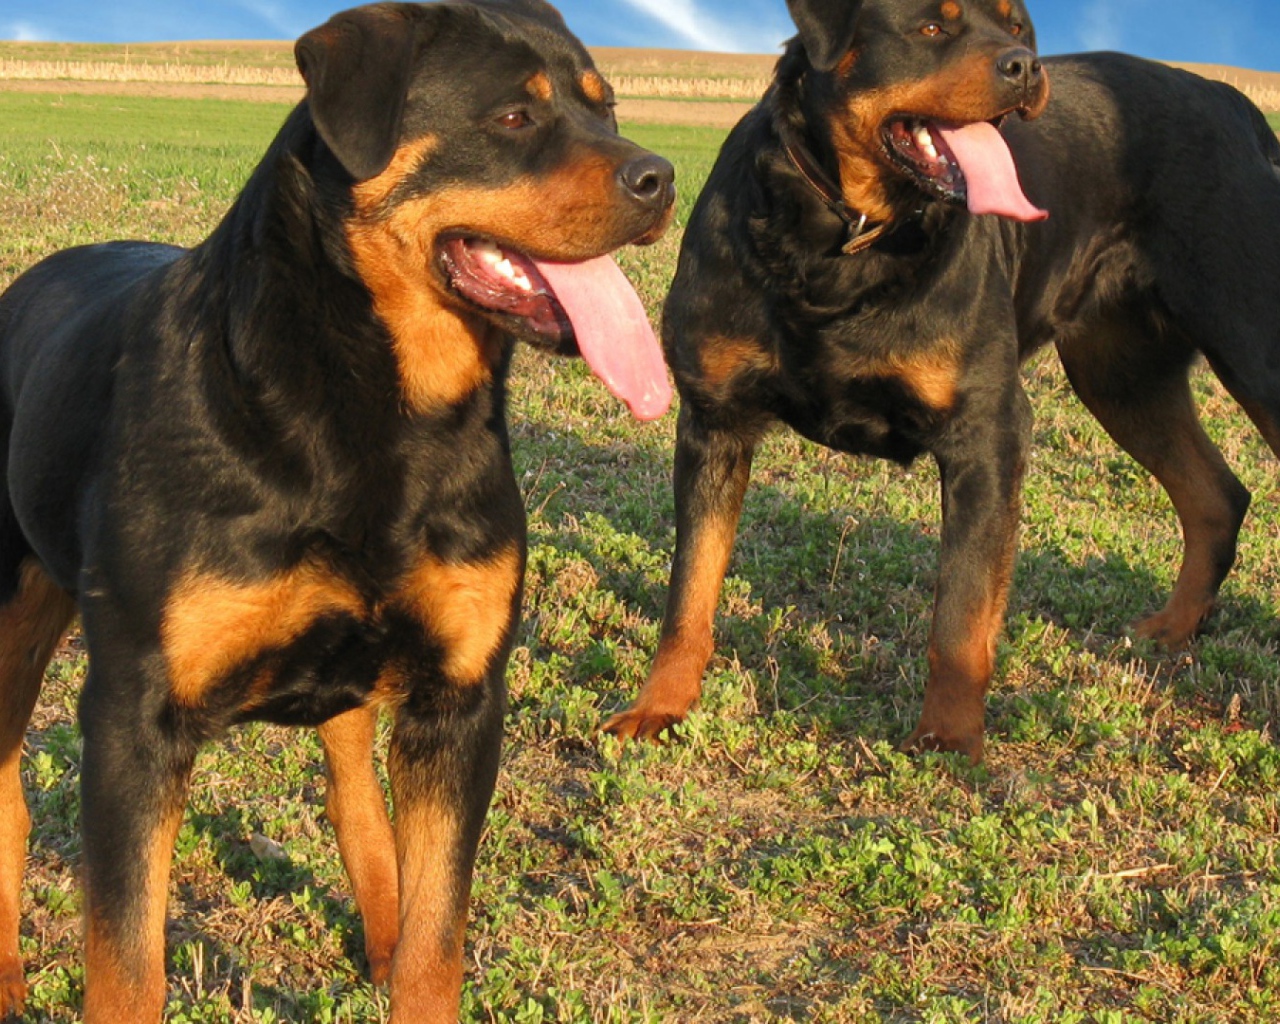 Two large Rottweiler